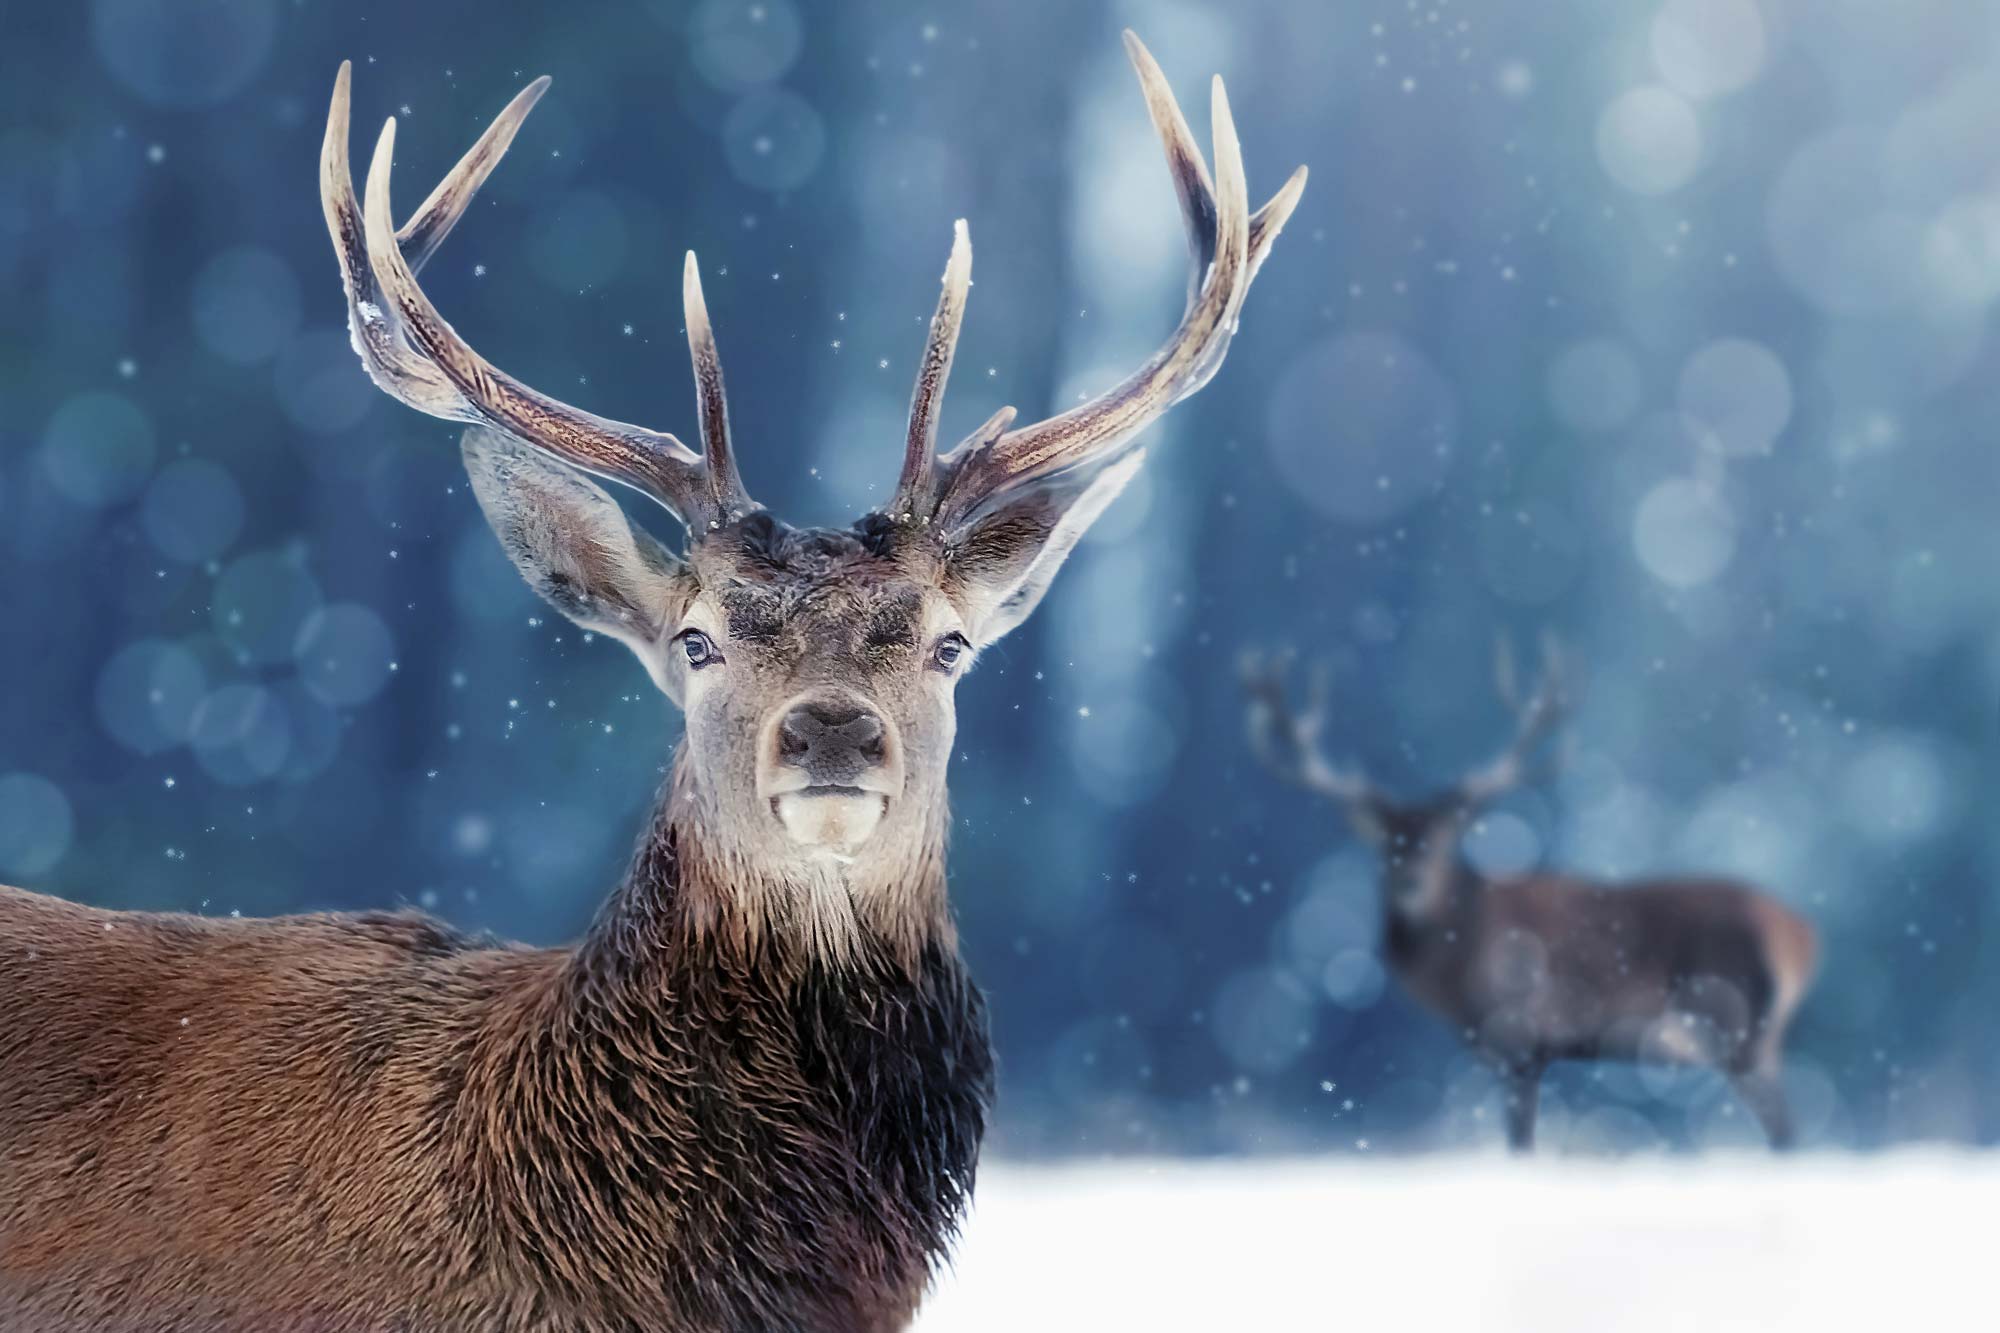 View of a stag in winter